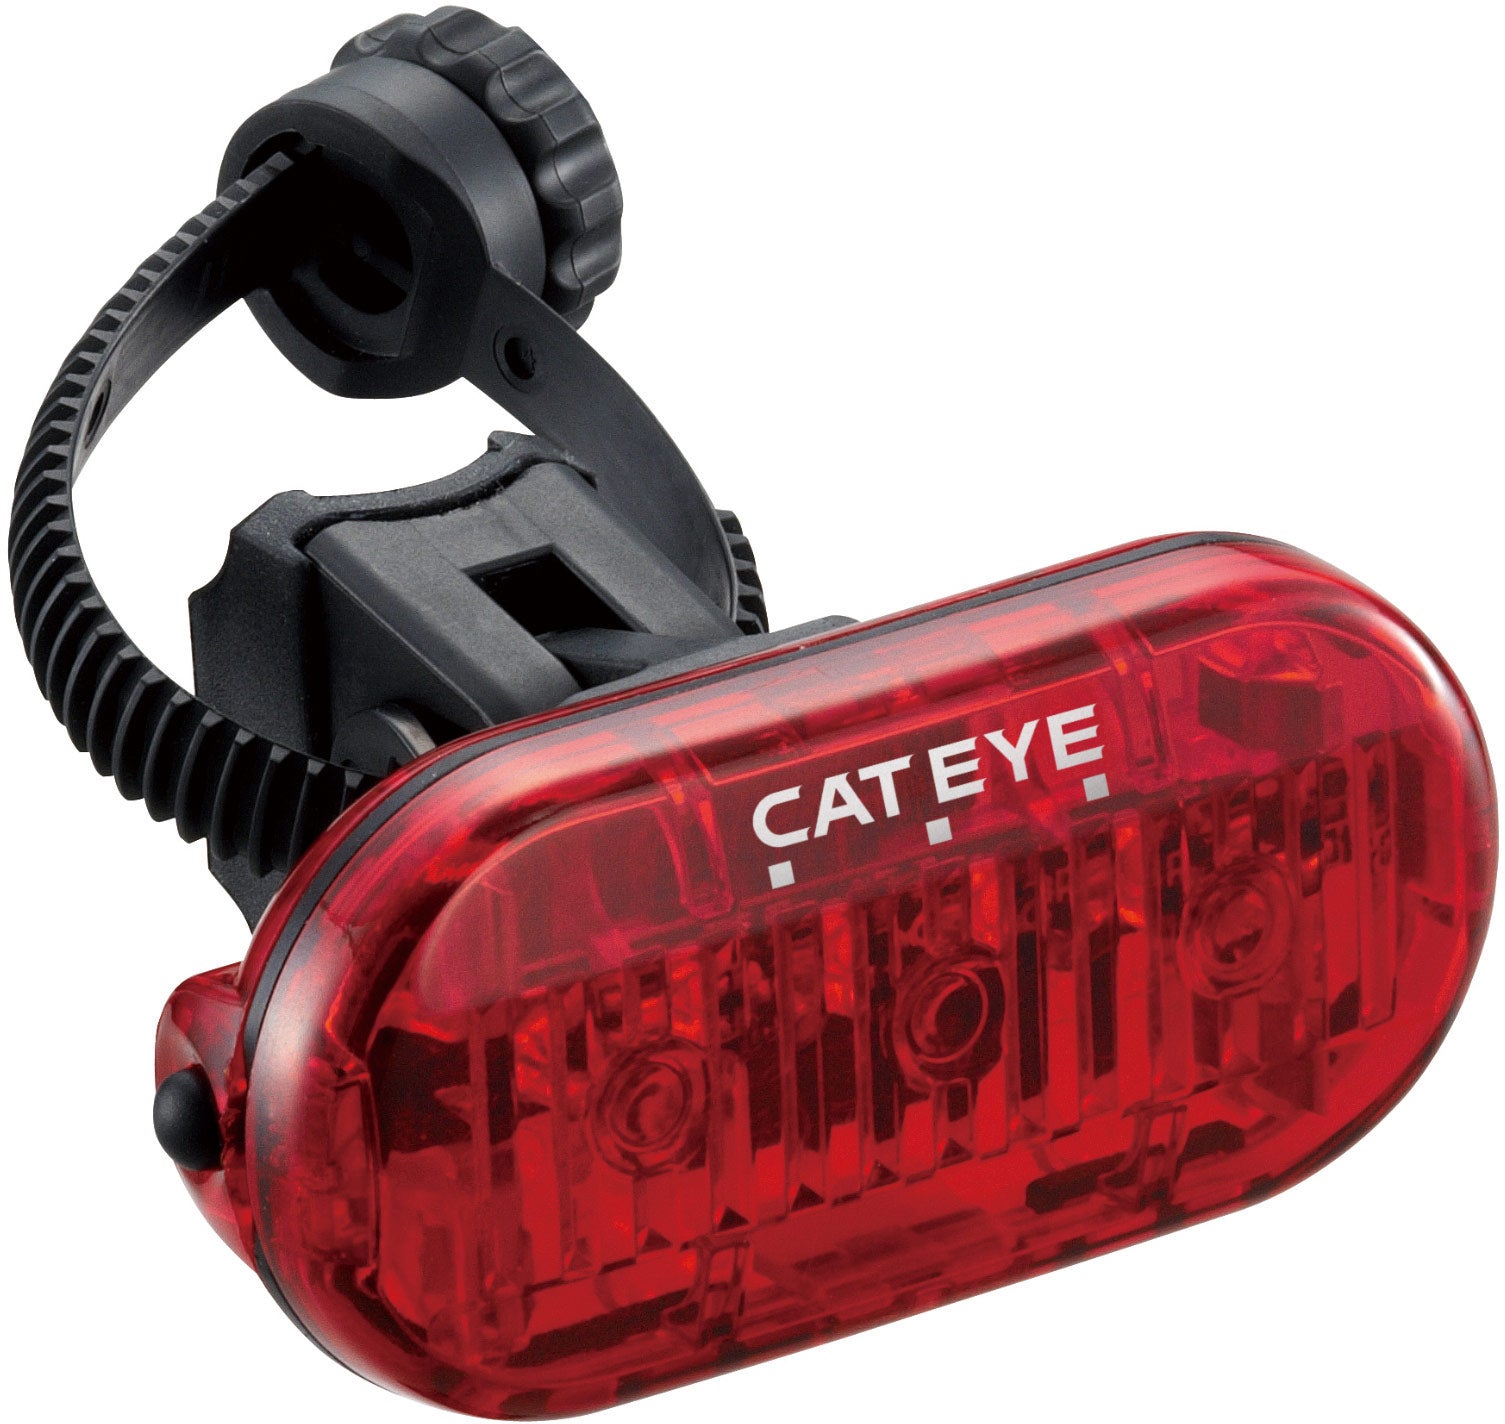 Cateye Omni3 Taillight, Batteries Included